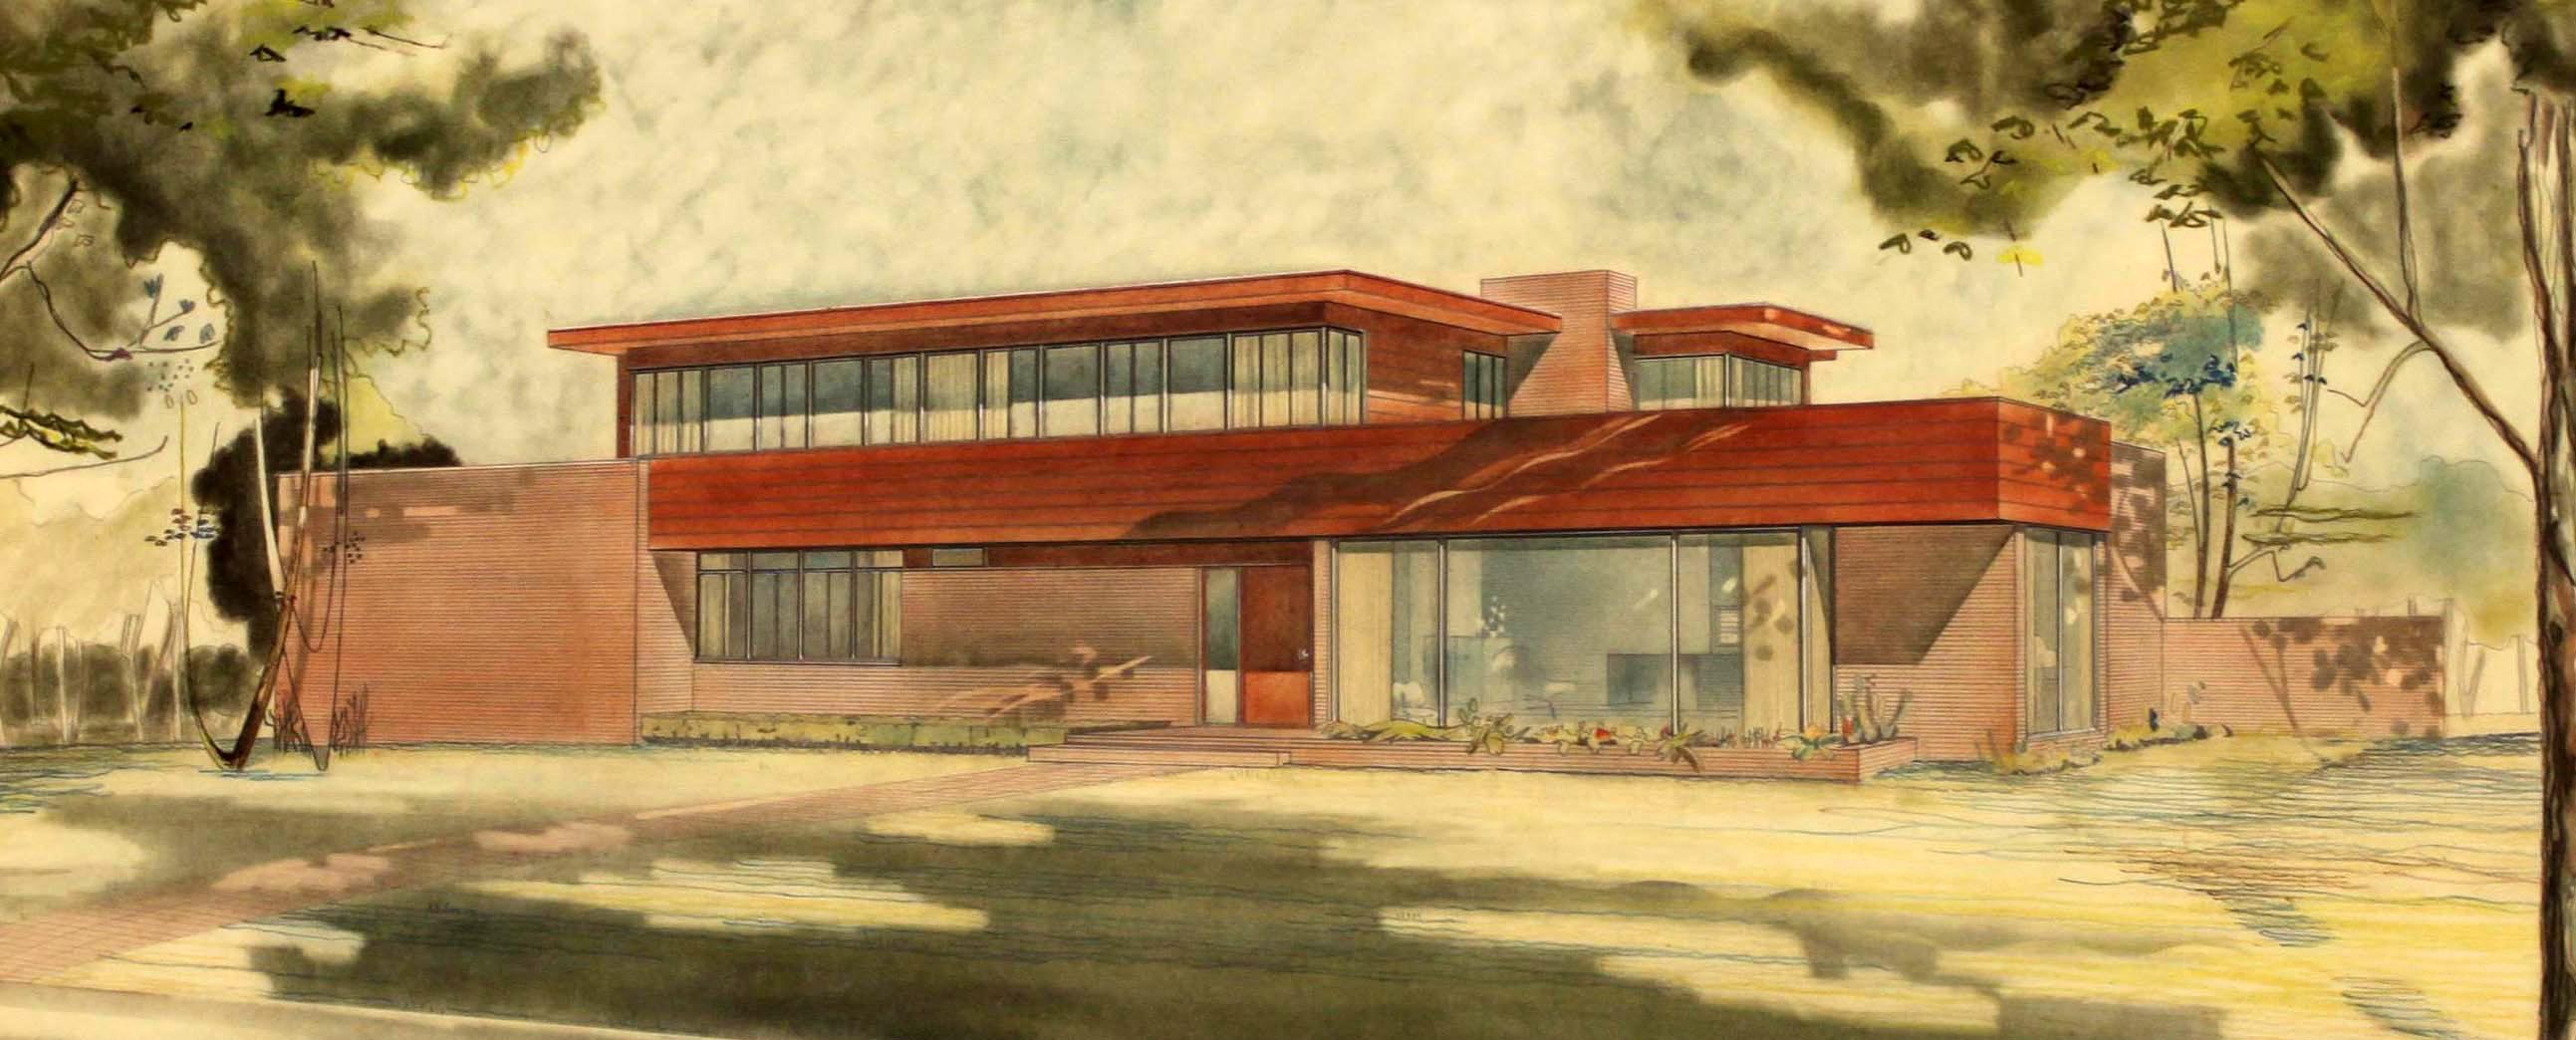 The image is a color pencil rendering of the Lipshy residence in Dallas, Texas. From the Howard R. Meyer collection